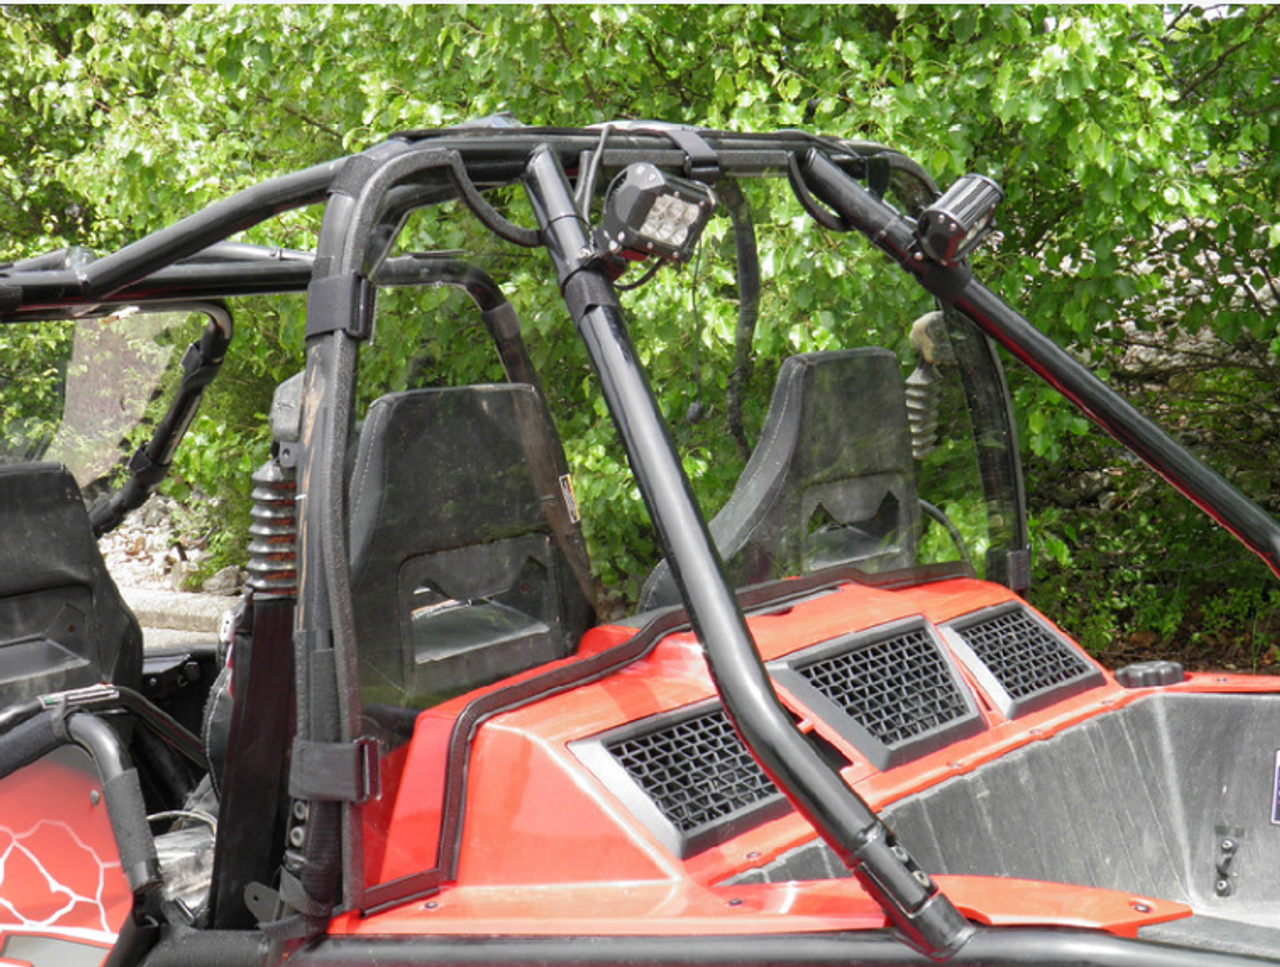 3 Star, side x side, arctic cat, wildcat 4, rear angle view